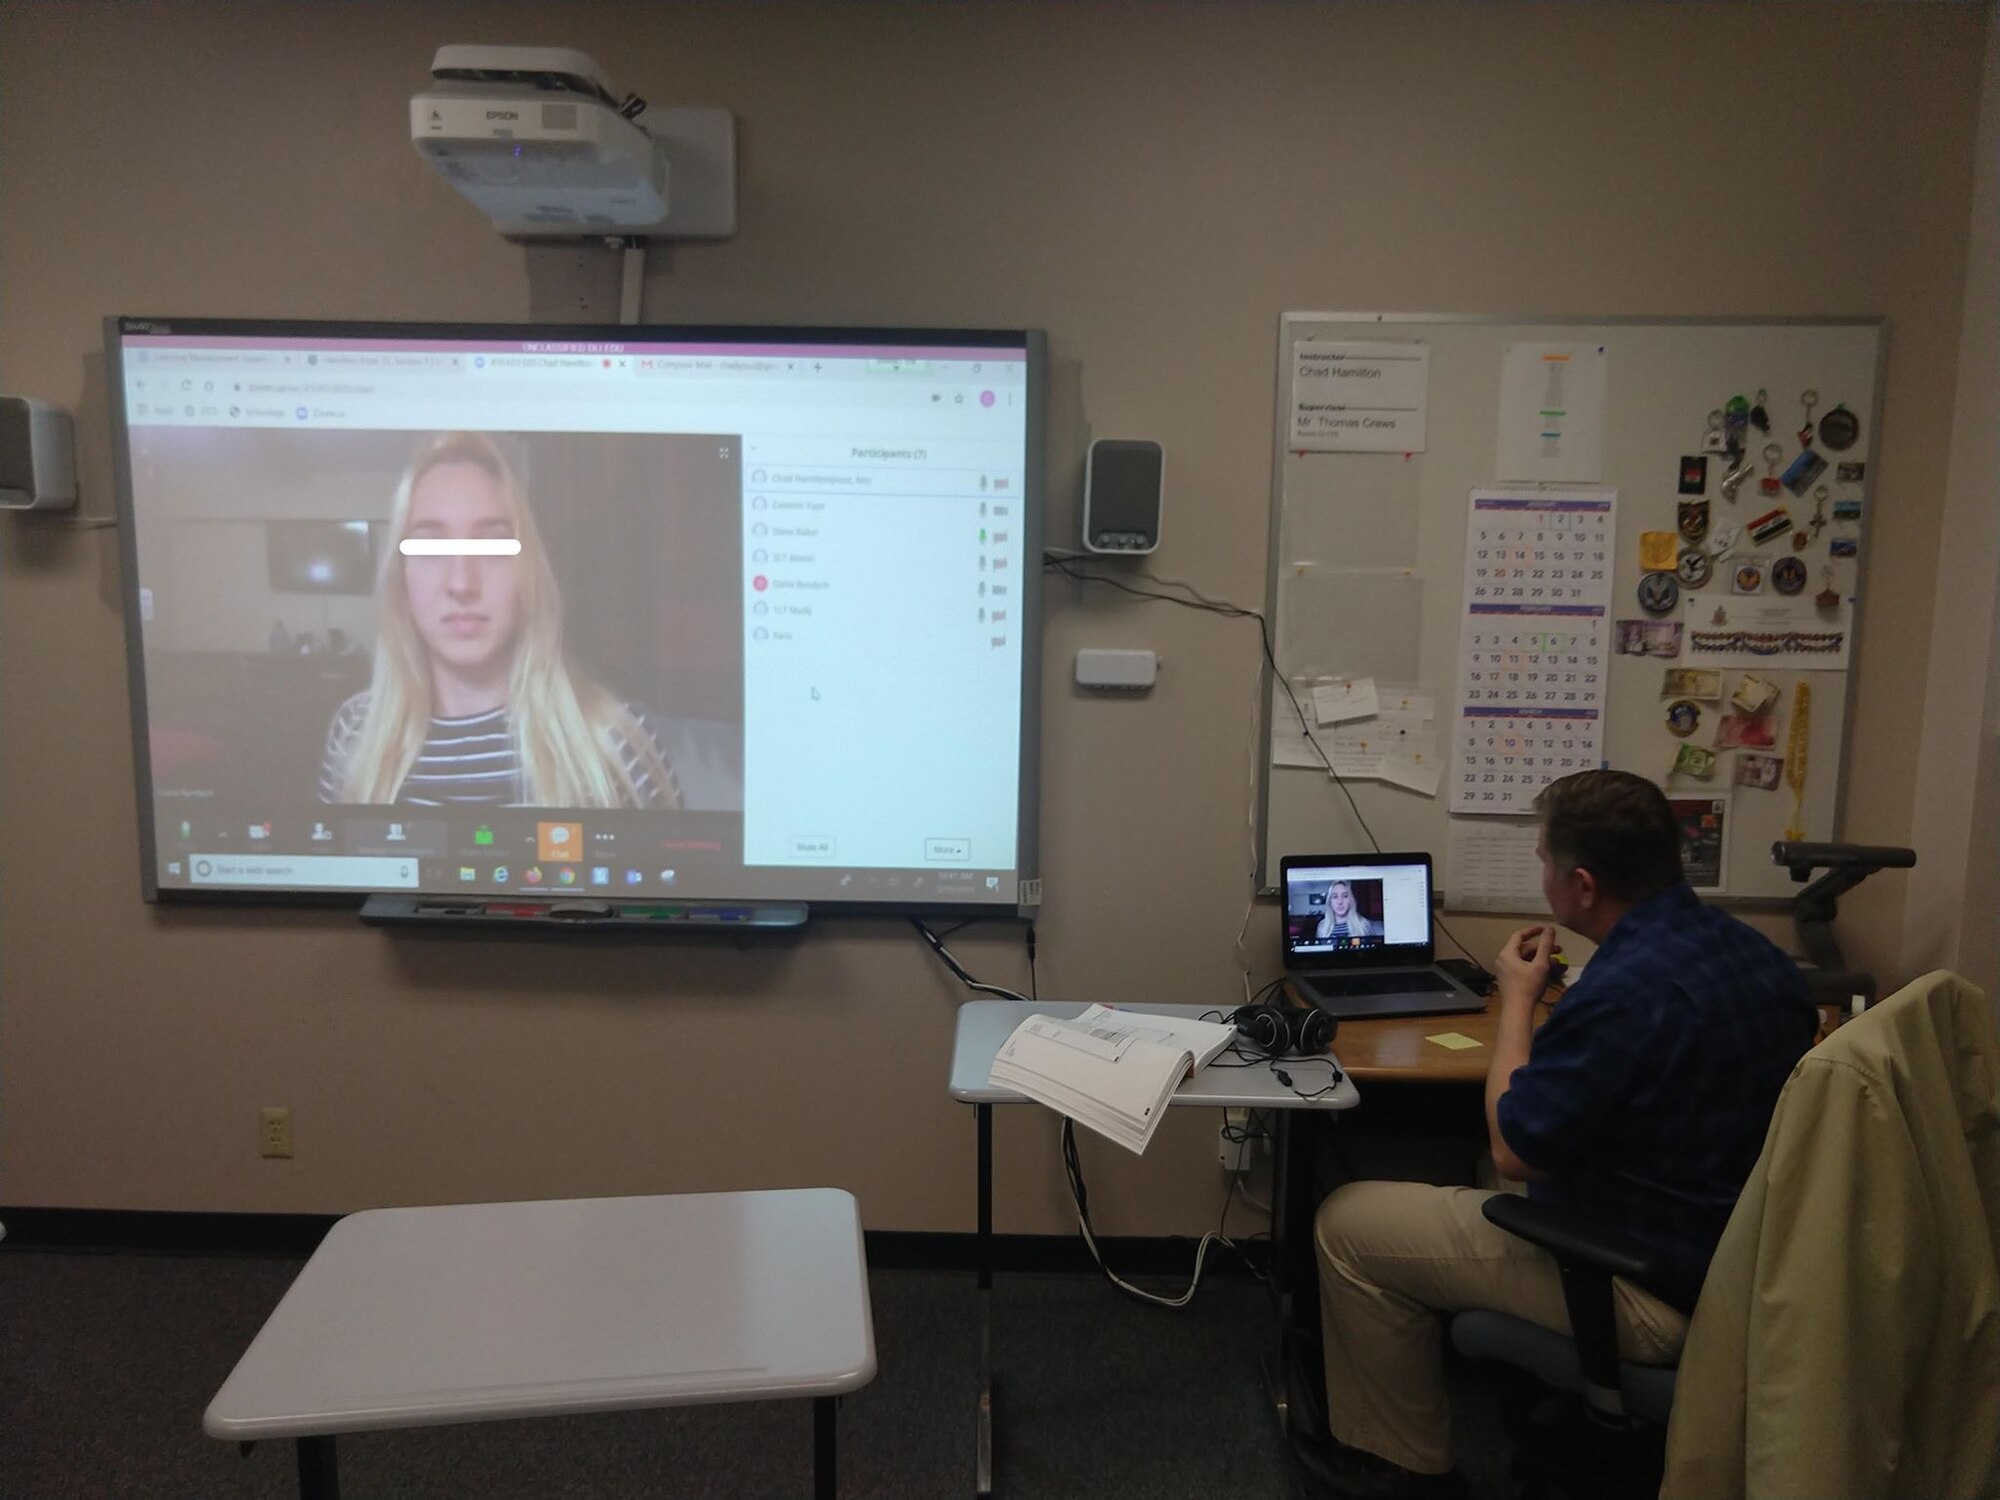 Zoom allows students and teachers to converse face-to-face while not even being in the classroom. Here an instructor is able to uphold the important face-to-face portion of language learning even at a distance. The COVID-19 pandemic generated rapid growth and innovation at DLIELC, with the team being afforded the opportunity to test the implementation of open source and government technologies to continue their mission of language education, despite geographical separation for faculty and students. (U.S. Air Force photo)